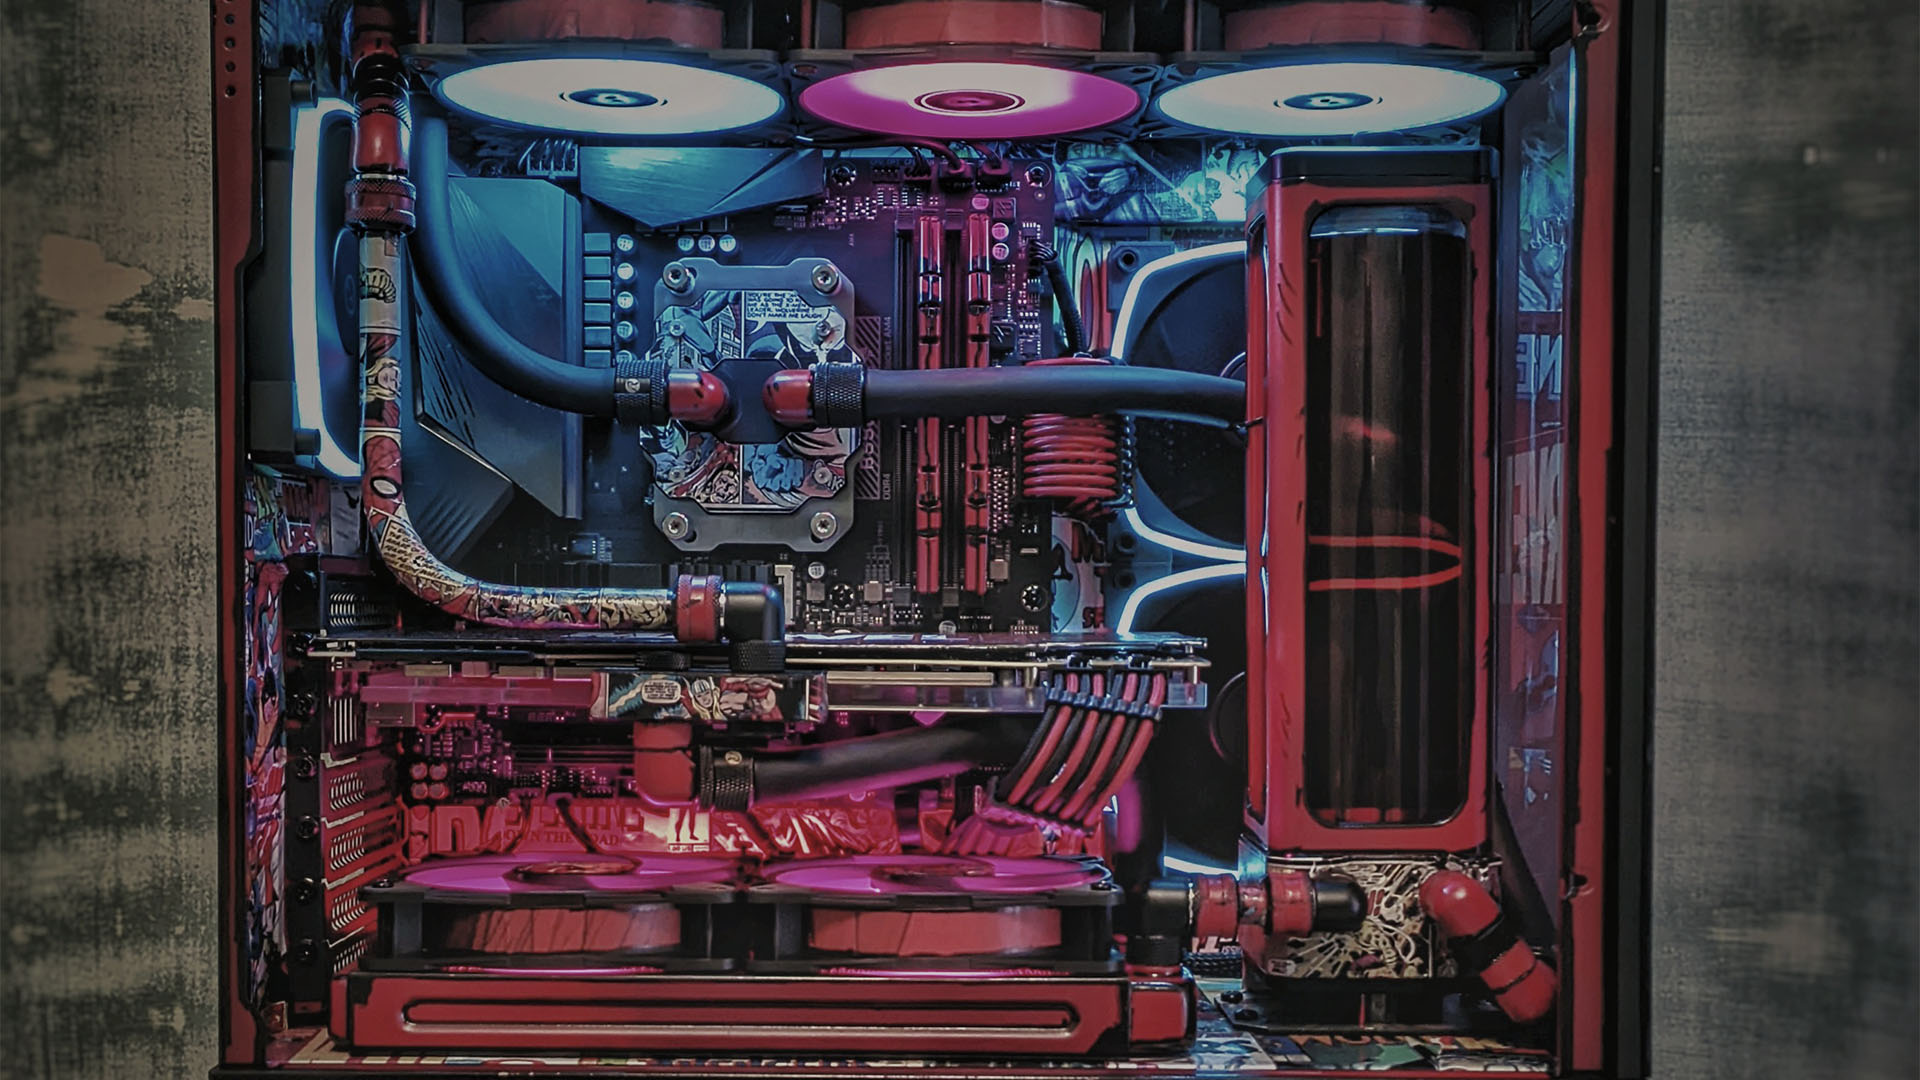 The inside of a red Marvel themed gaming PC complete with comic book strips